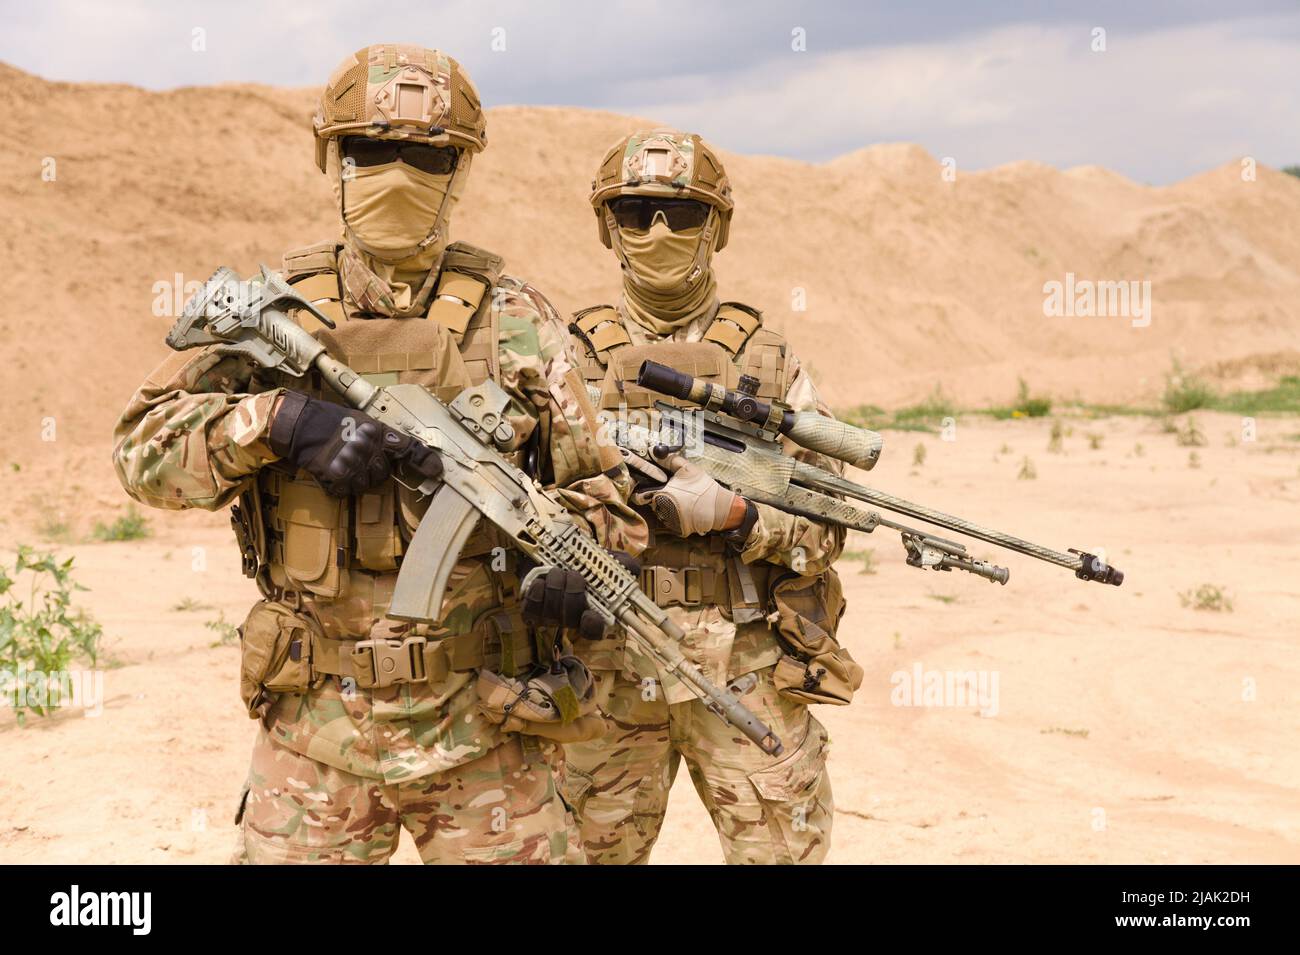 Portrait of two special forces soldiers during military operation in desert. Stock Photo